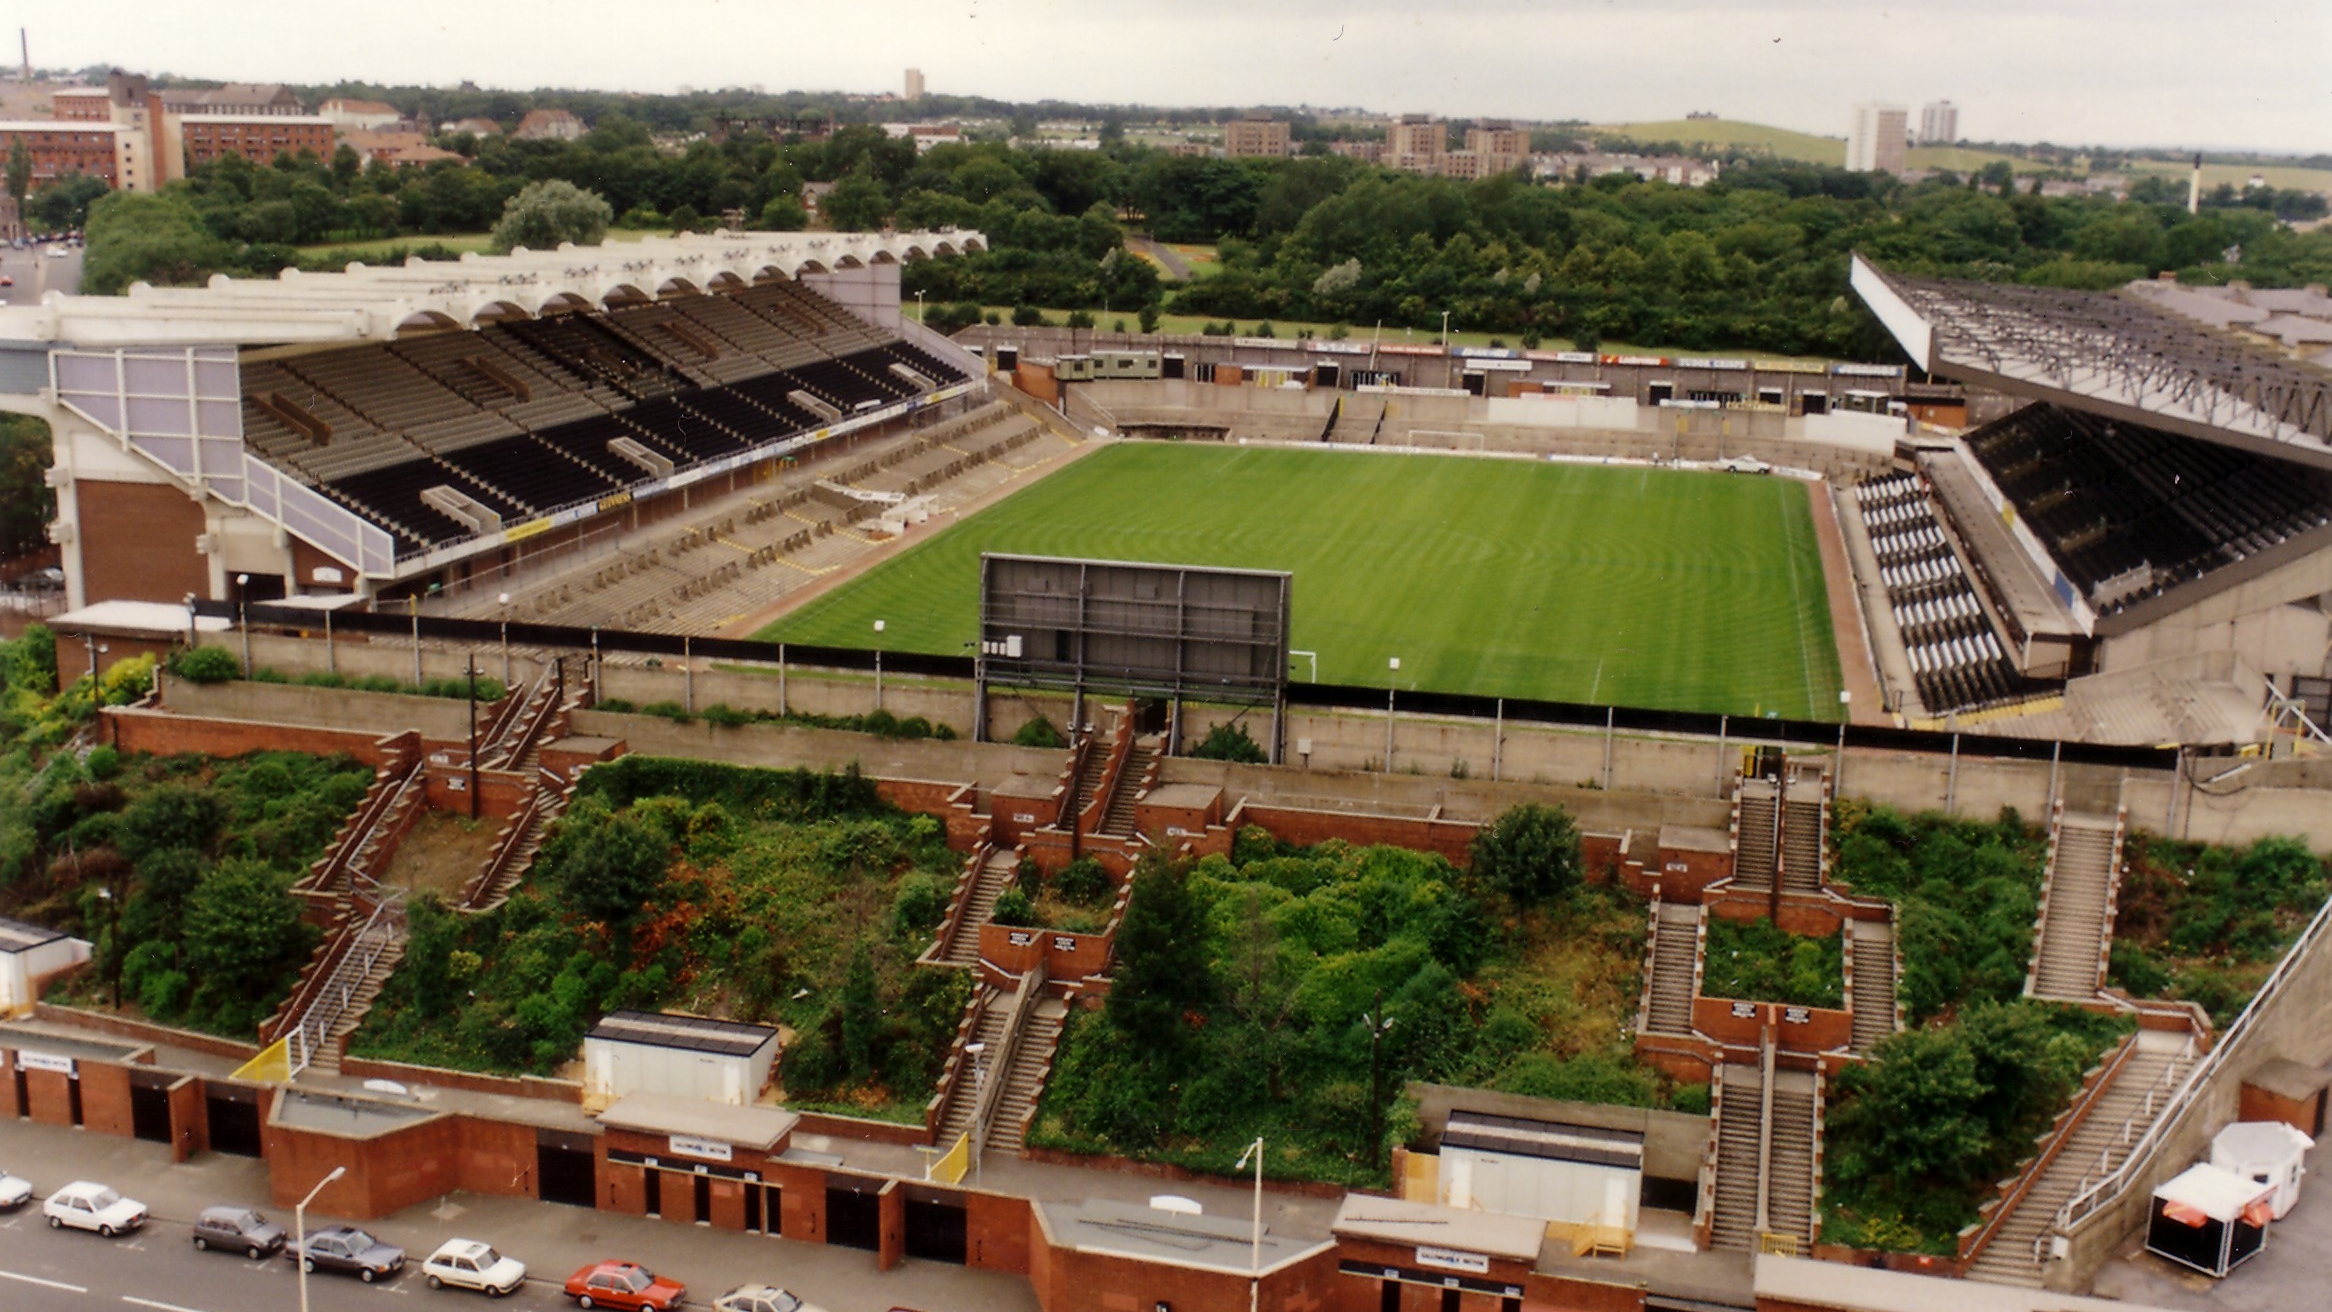 st-james-park-takes-shape-by-the-late-80